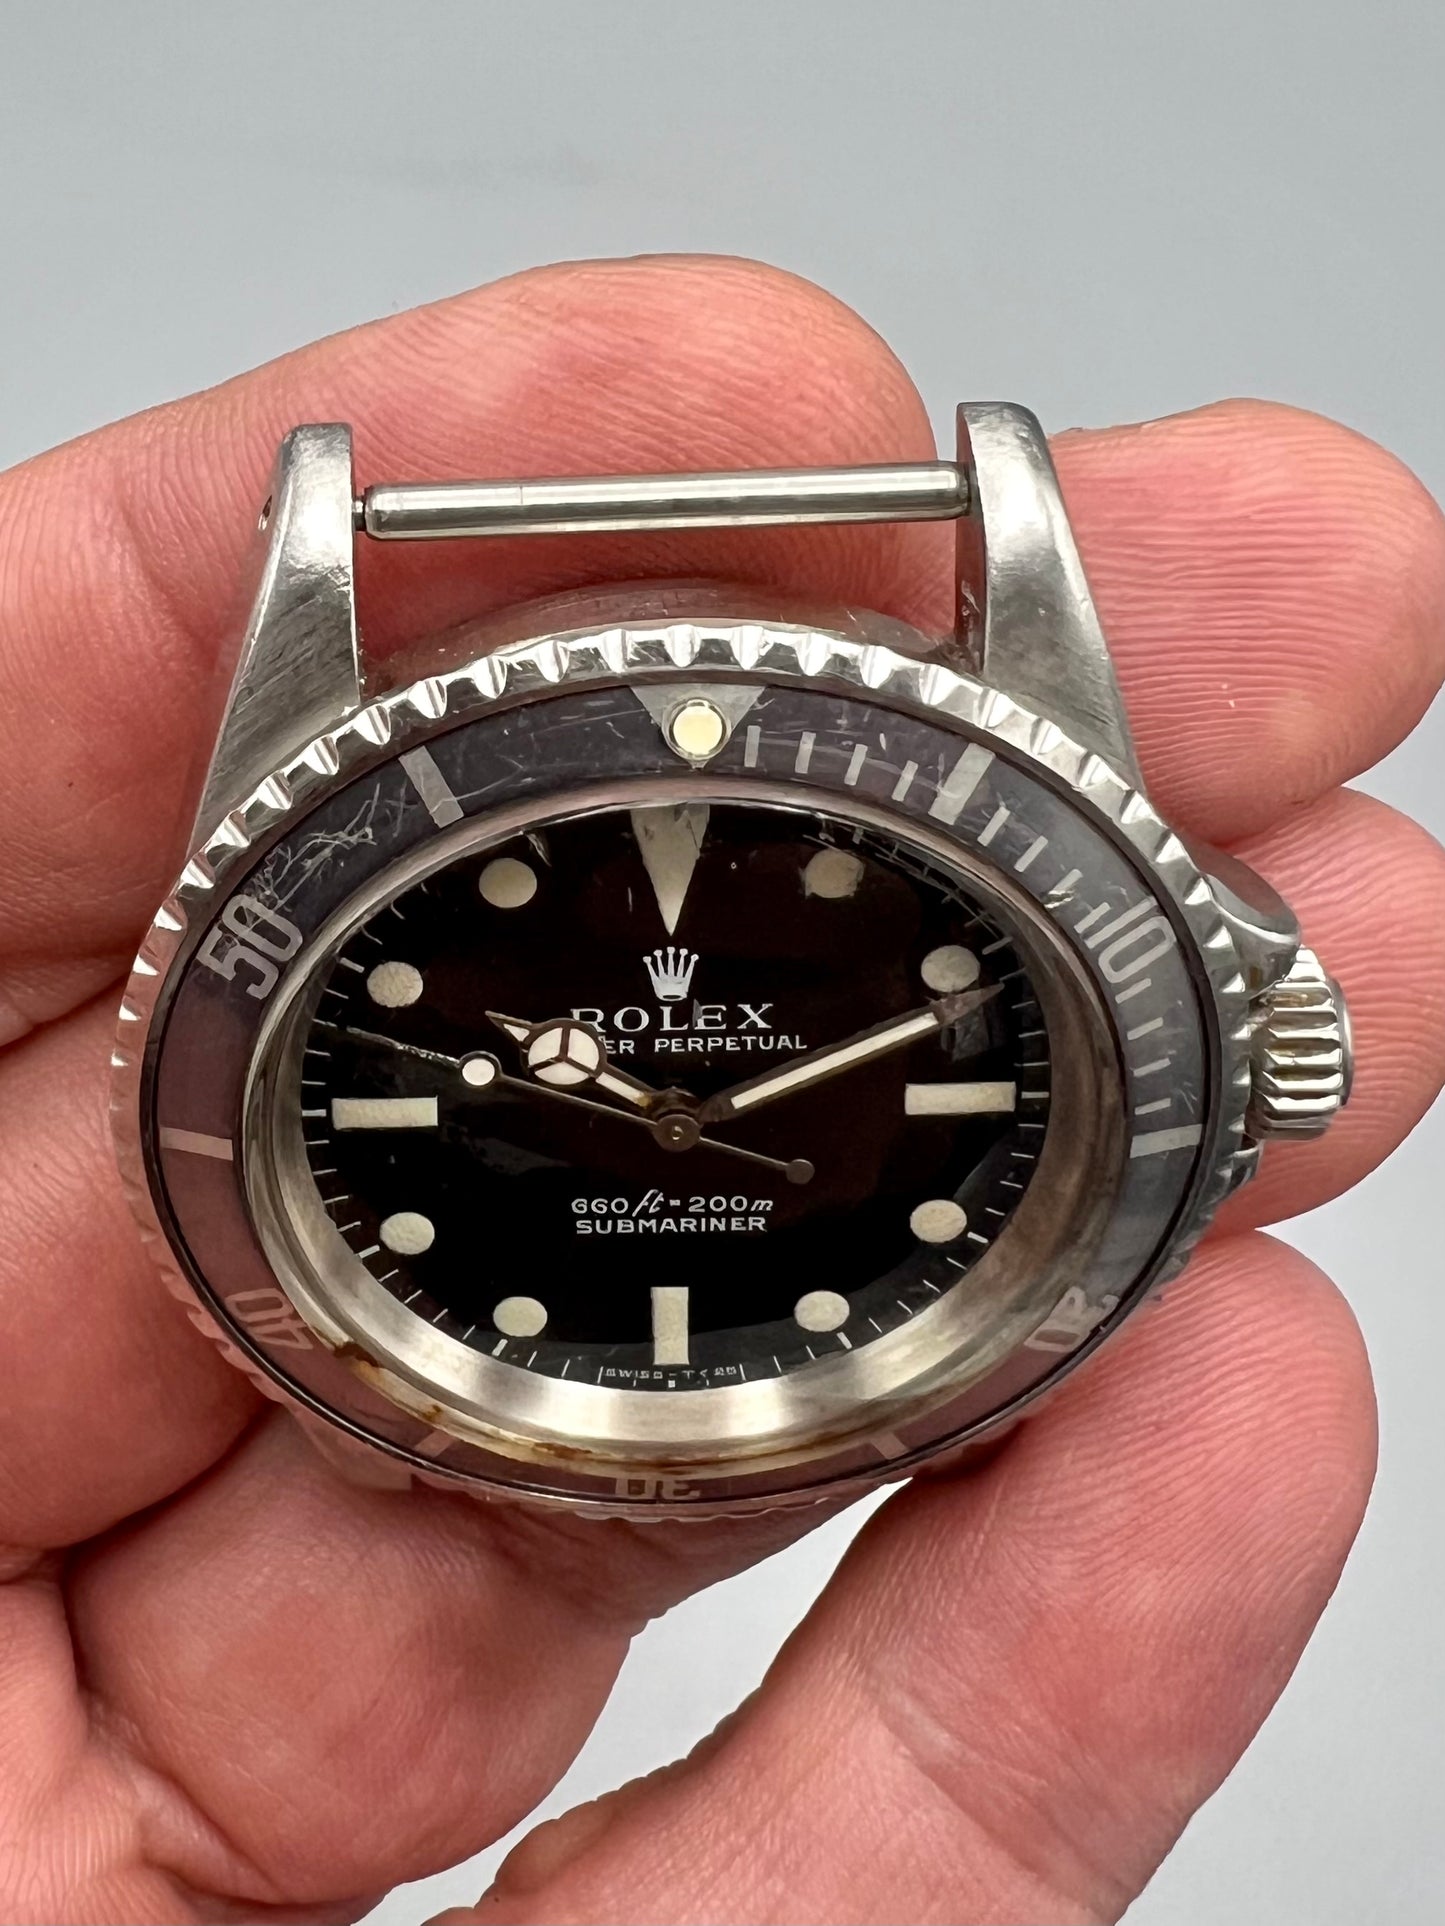 Rolex Ref 5513 Submariner COMEX, RARE early model, with helium escape valve, ghost bezel, 1971